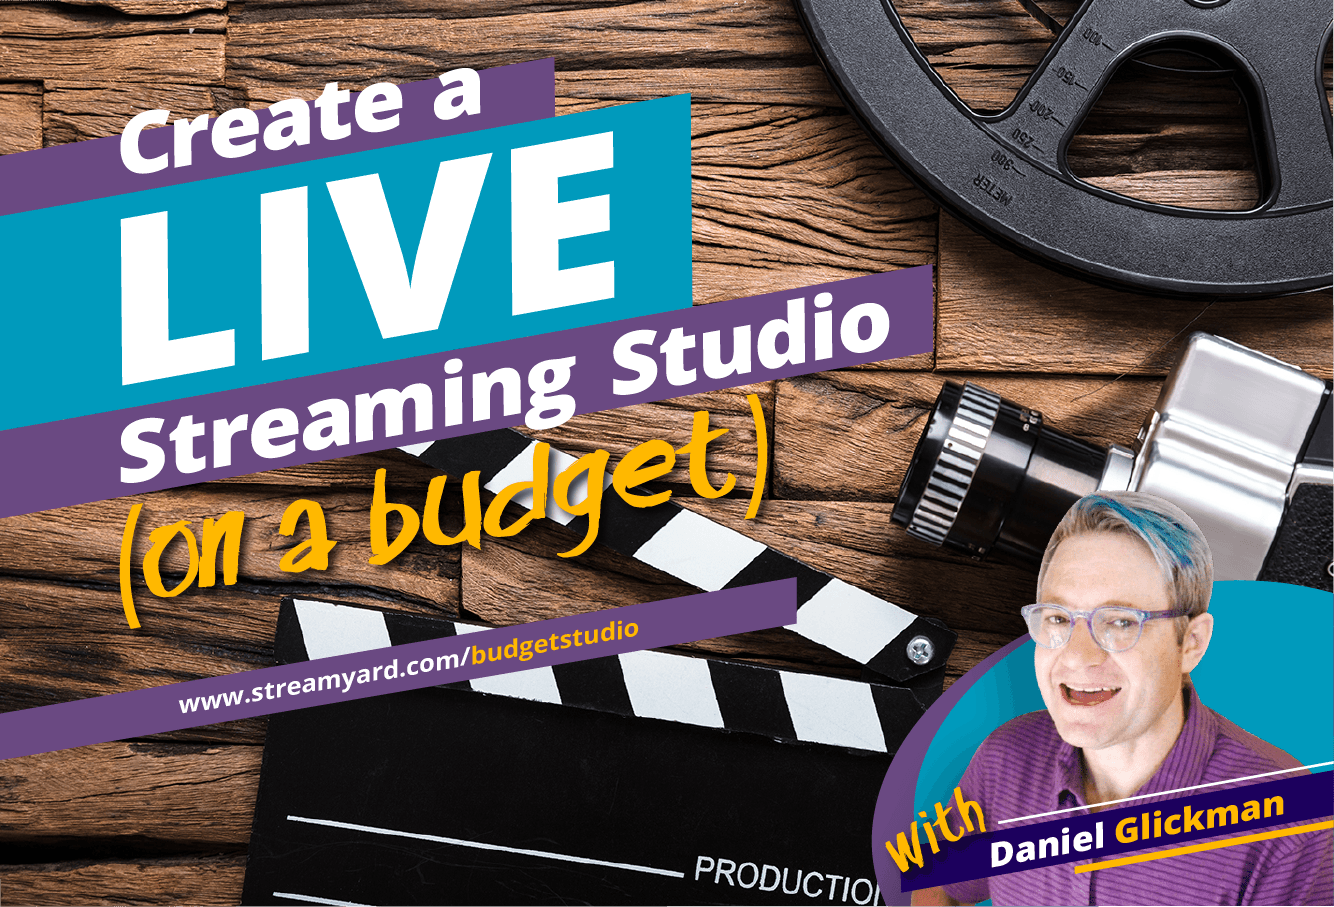 Learn how to setup a home video studio to create a live streaming studio on a budget with Daniel Glickman.